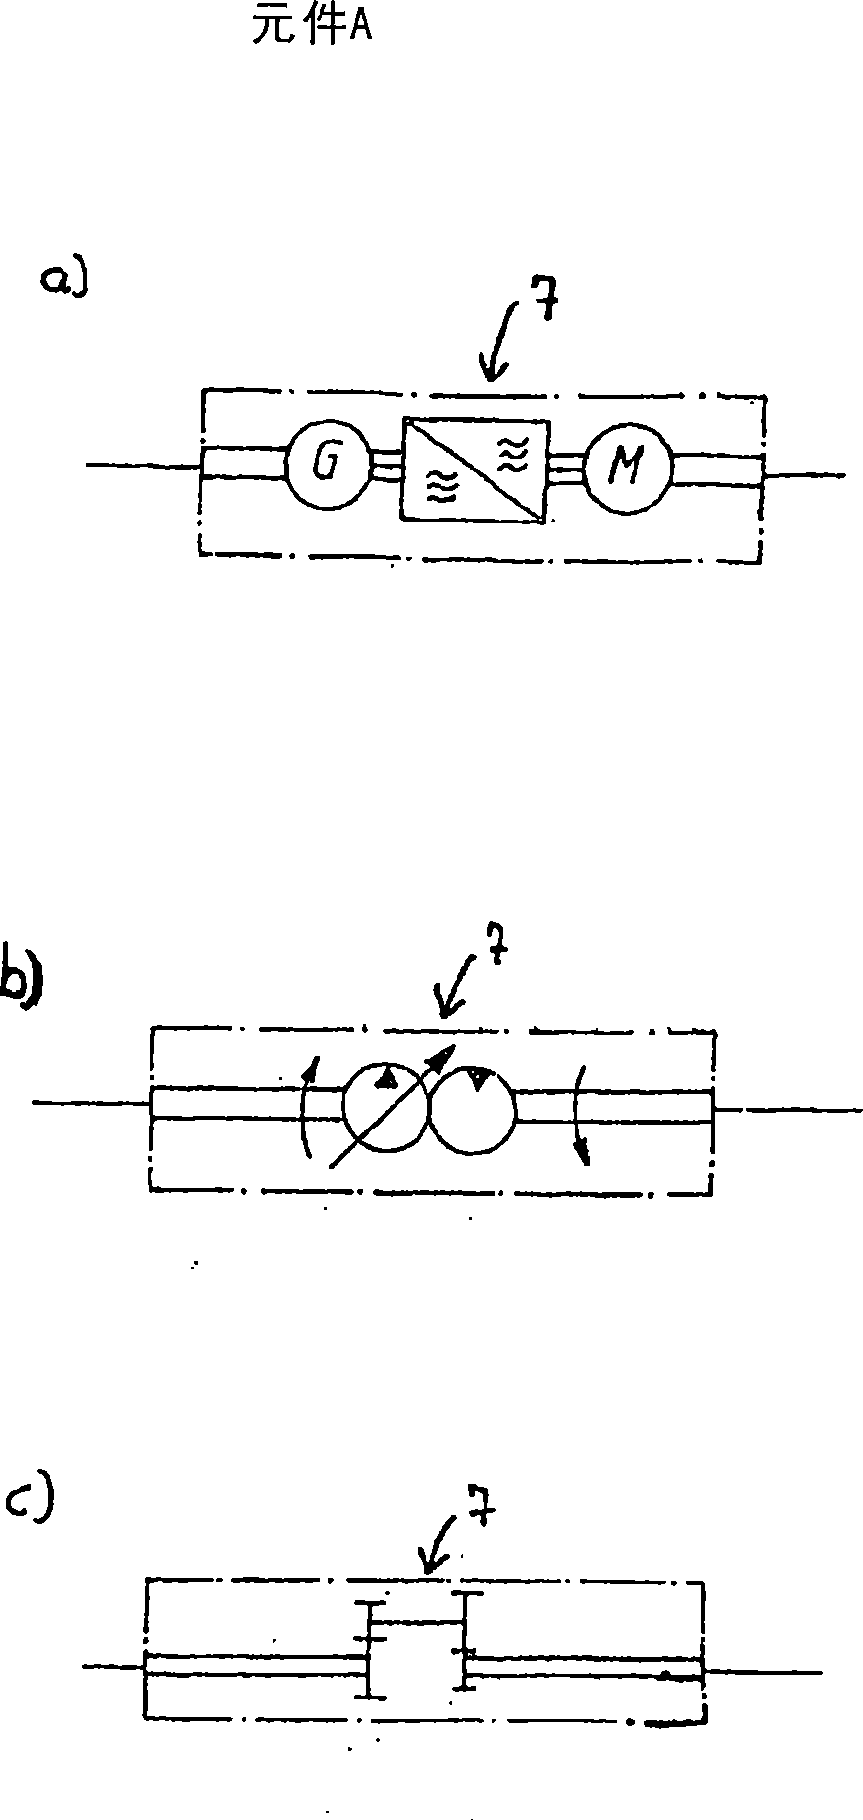 Device and method for producing granules from a polymer melt